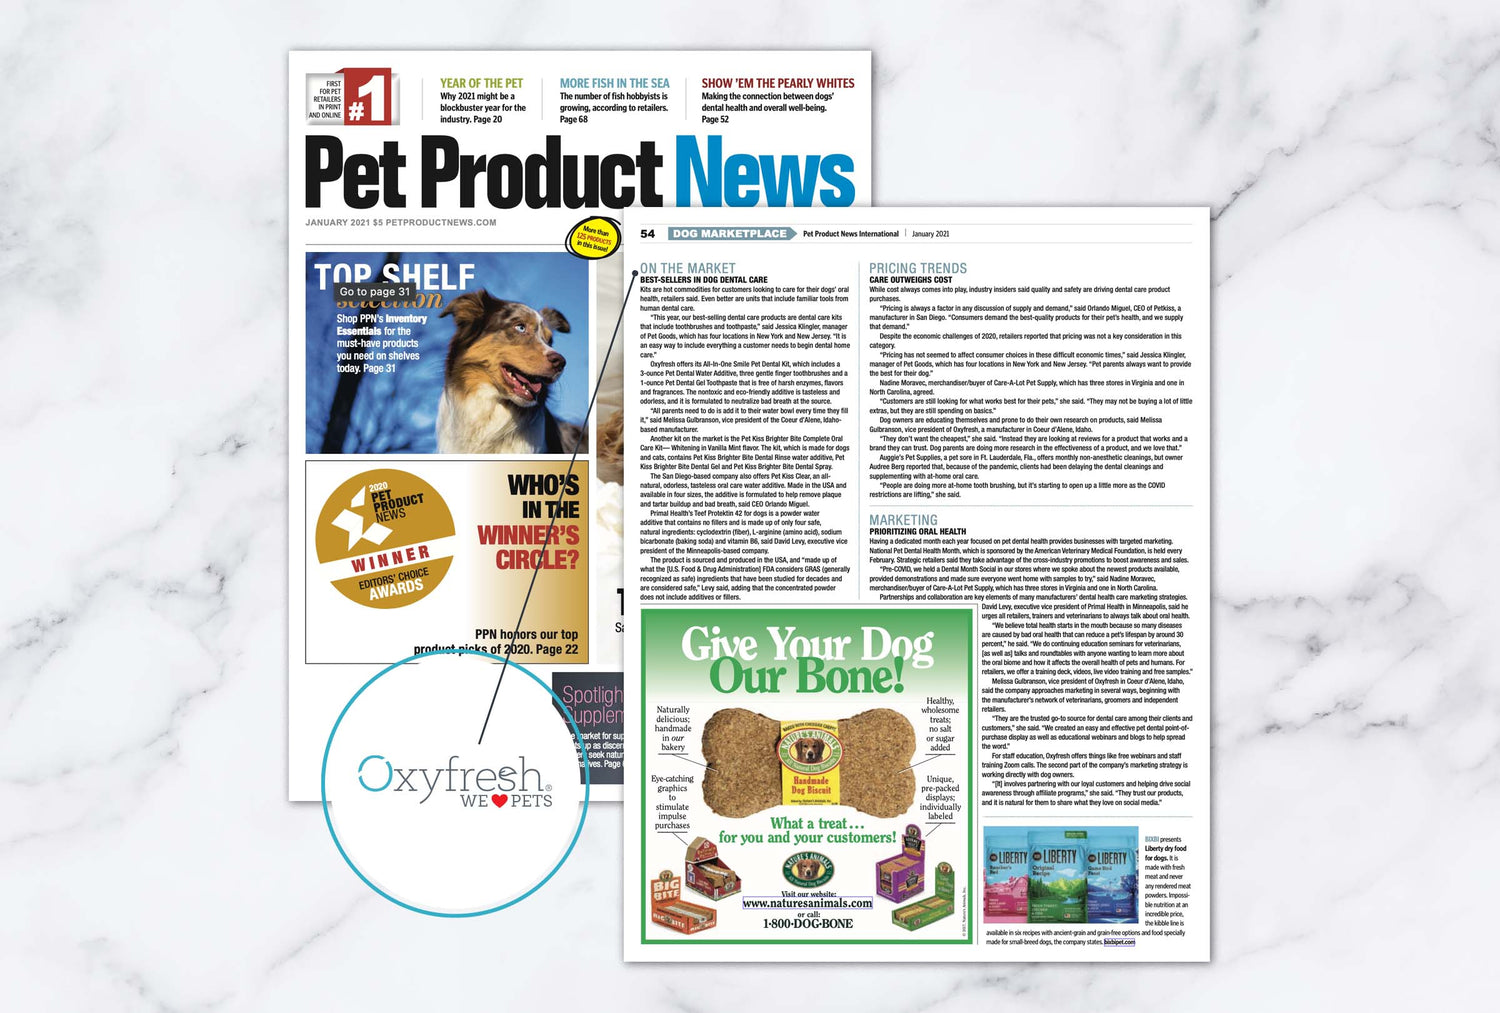 Oxyfresh Pet Dental Kit Featured in January 2021 Issue of Pet Product News